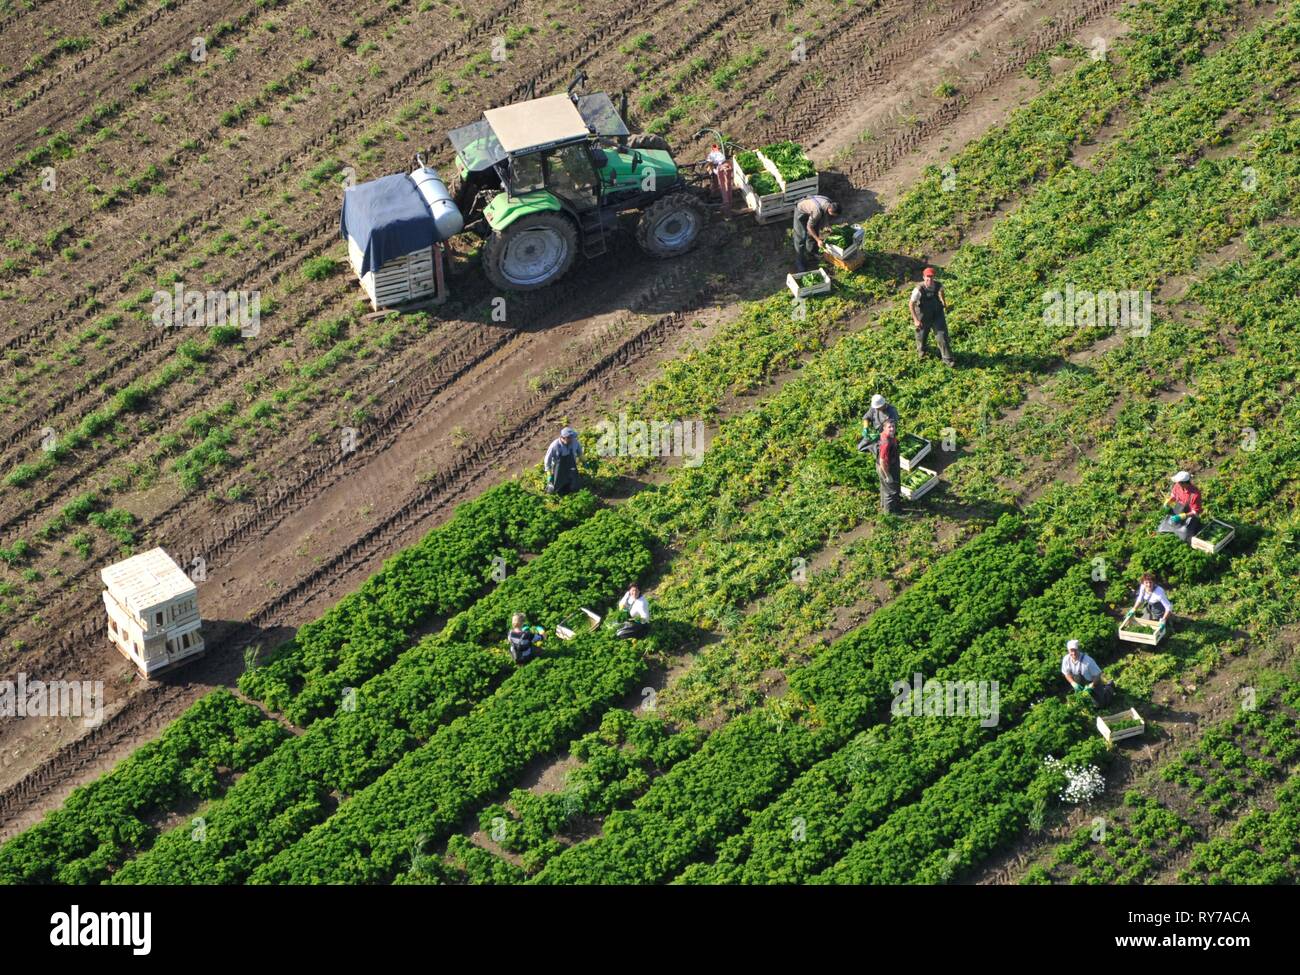 Workers harvesting in the field, Schleswig-Holstein, Germany Stock Photo